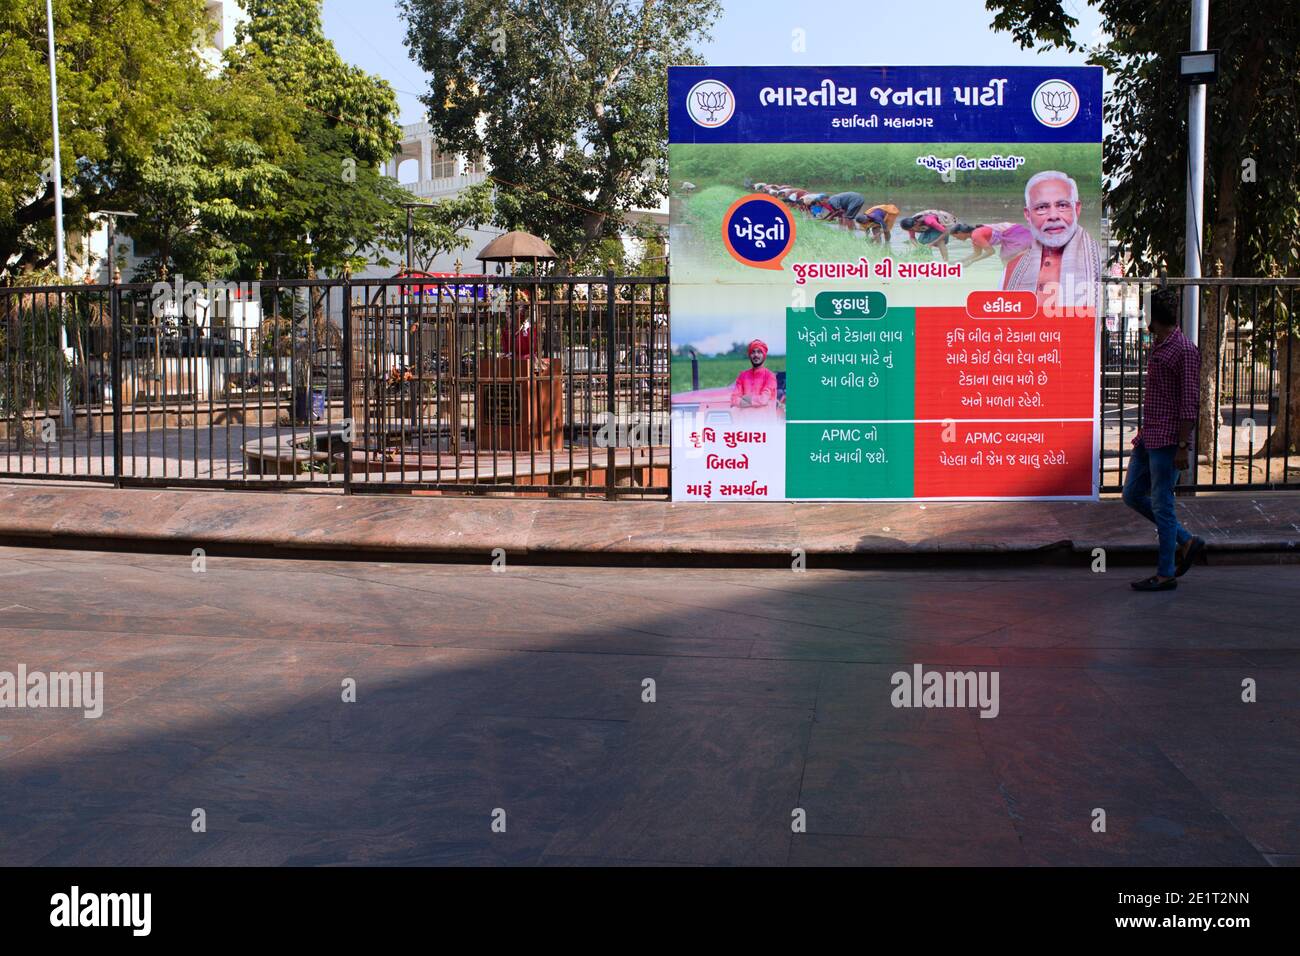 A man in Ahmedabad, Gujarat walks past a poster demonstrating 2020 farm law reforms lies versus facts put up the ruling Bhartiya Janta Party. Stock Photo